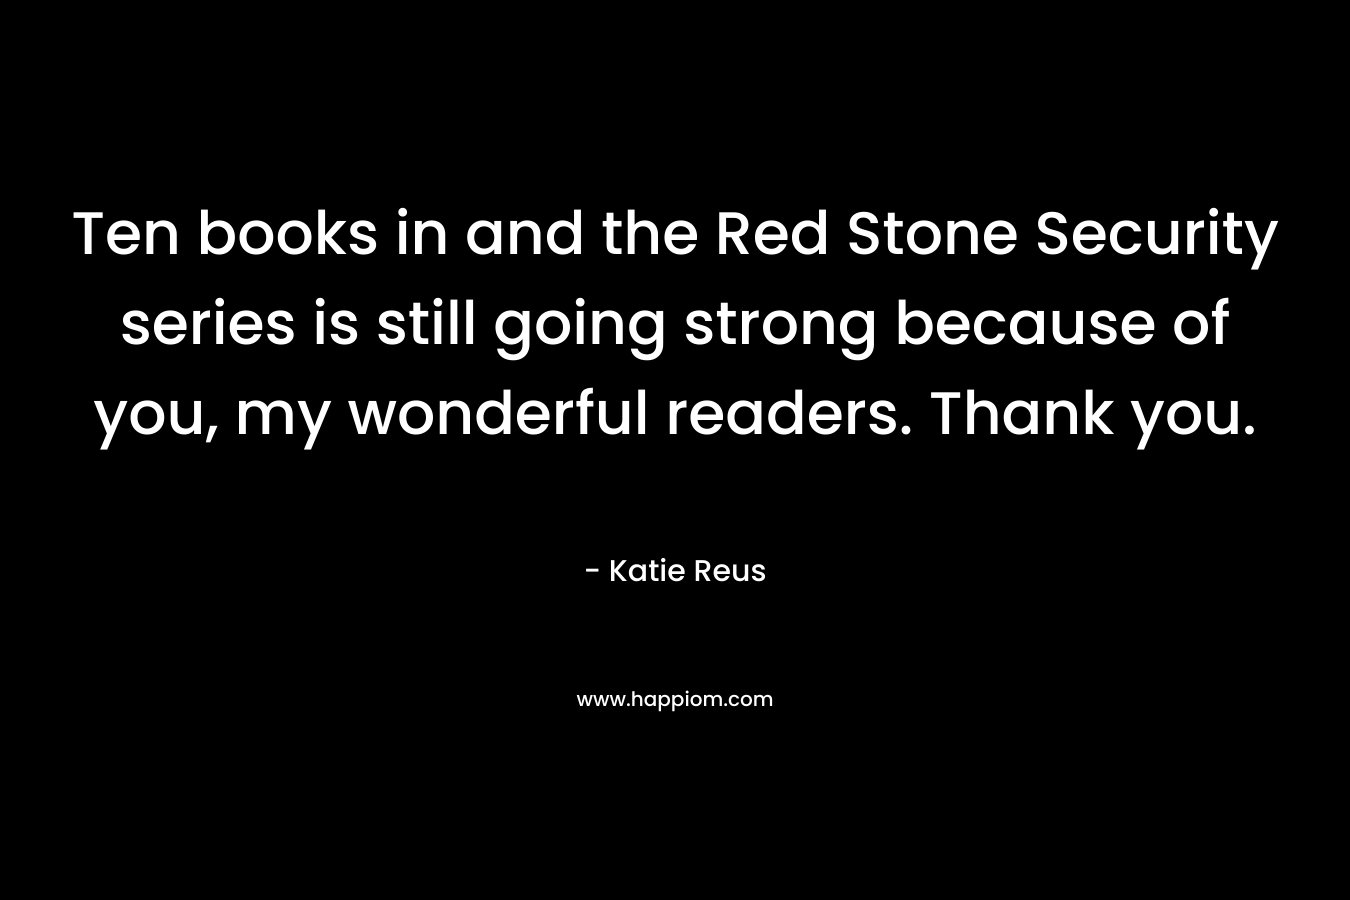 Ten books in and the Red Stone Security series is still going strong because of you, my wonderful readers. Thank you. – Katie Reus